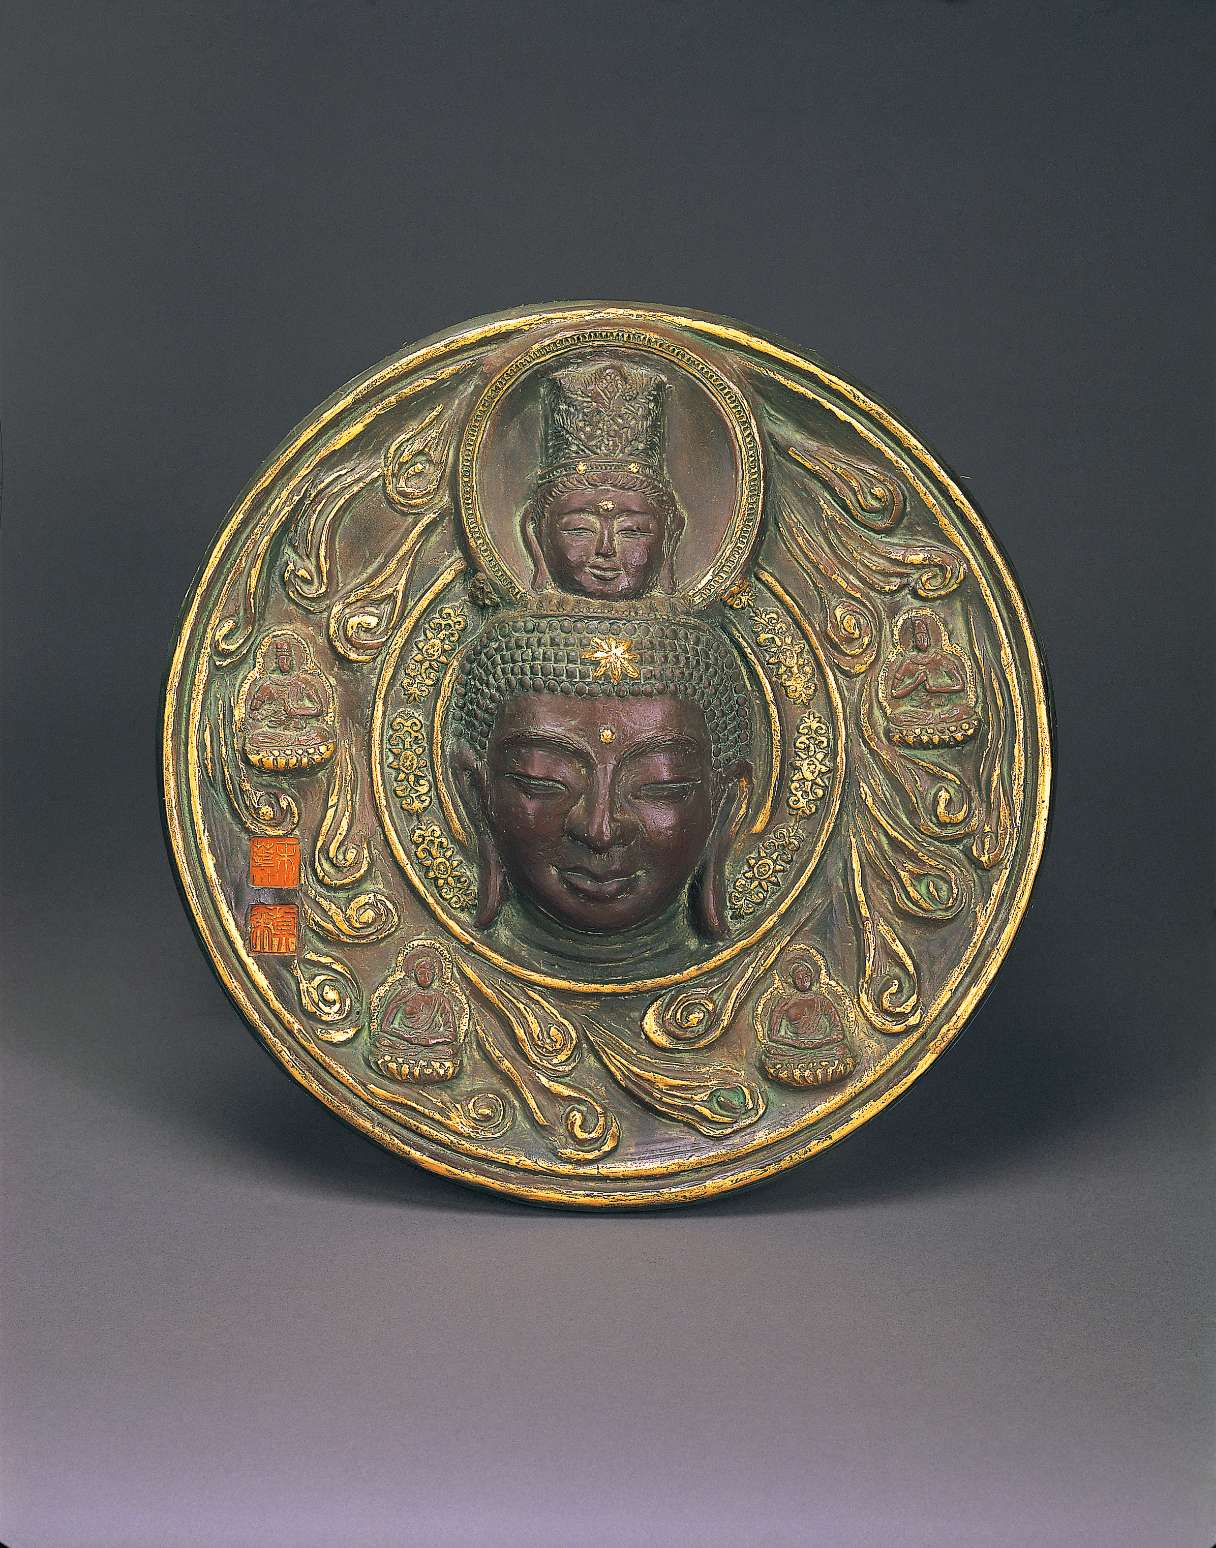 A metallic disc bears the head of a buddha at the center, atop which sits another smaller buddha head wearing a tall crown; reliefs of decorative clouds and small seated buddhas surround the heads.